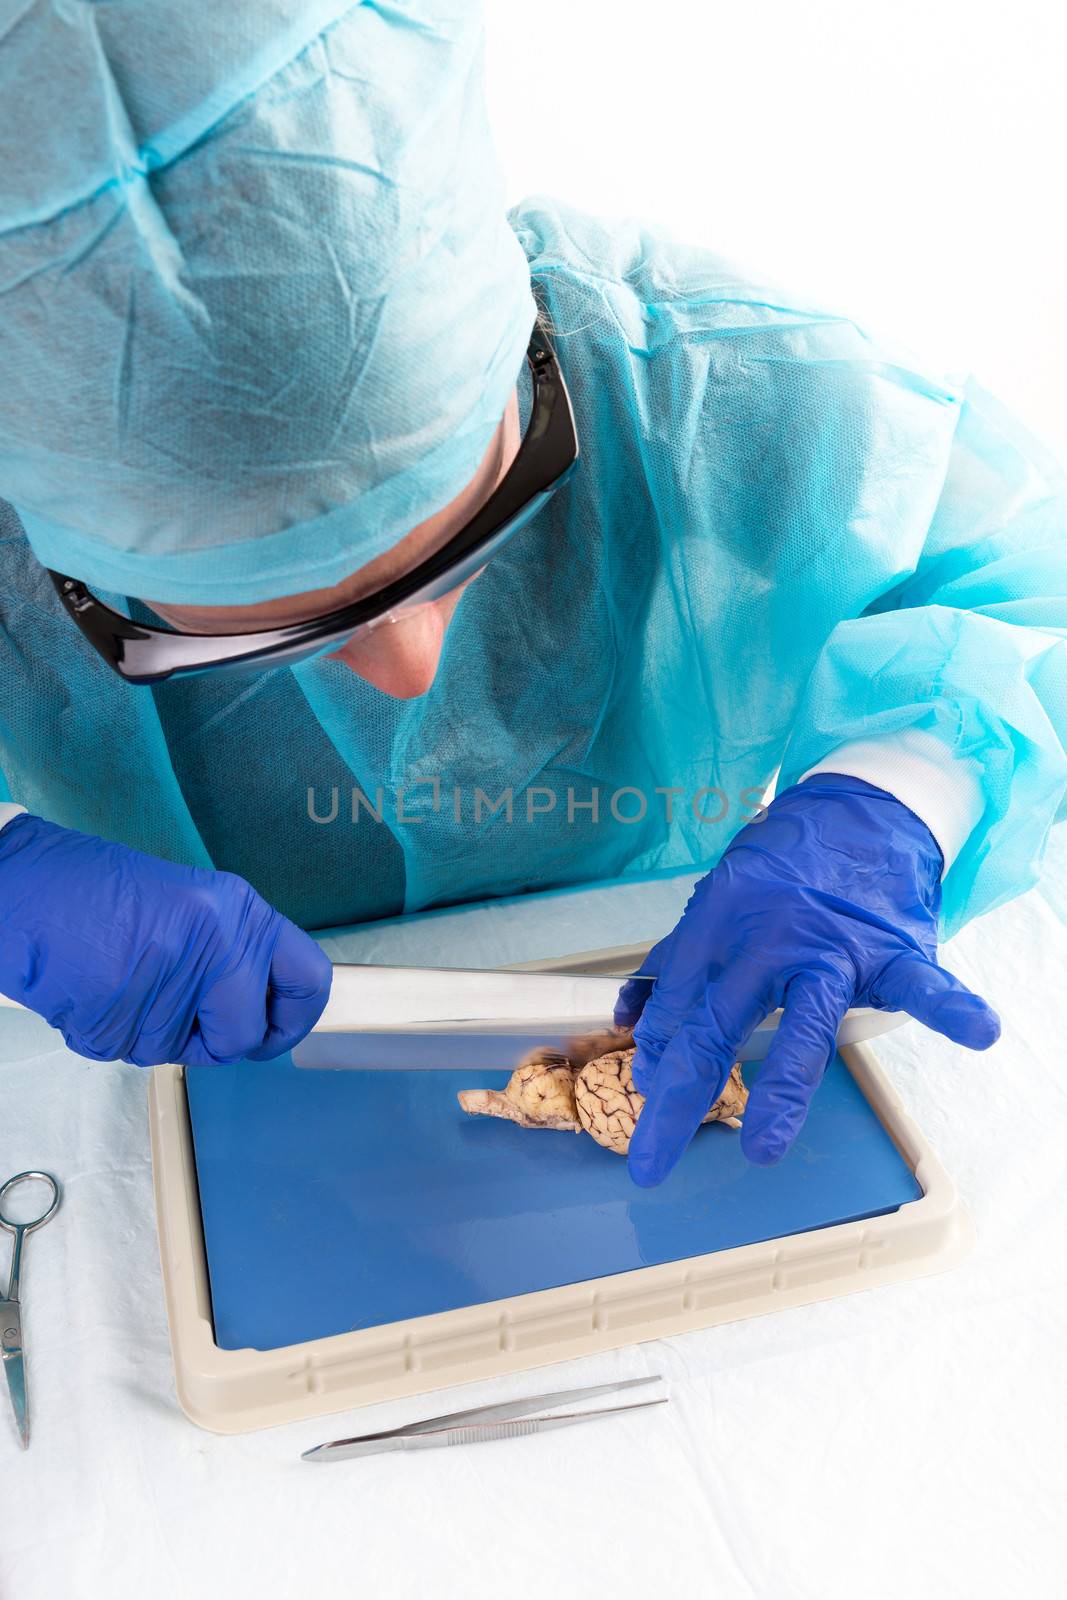 Anatomy student dissecting a cow brain slicing through the two hemispheres and the lobes with a blade to obtain a cross-section